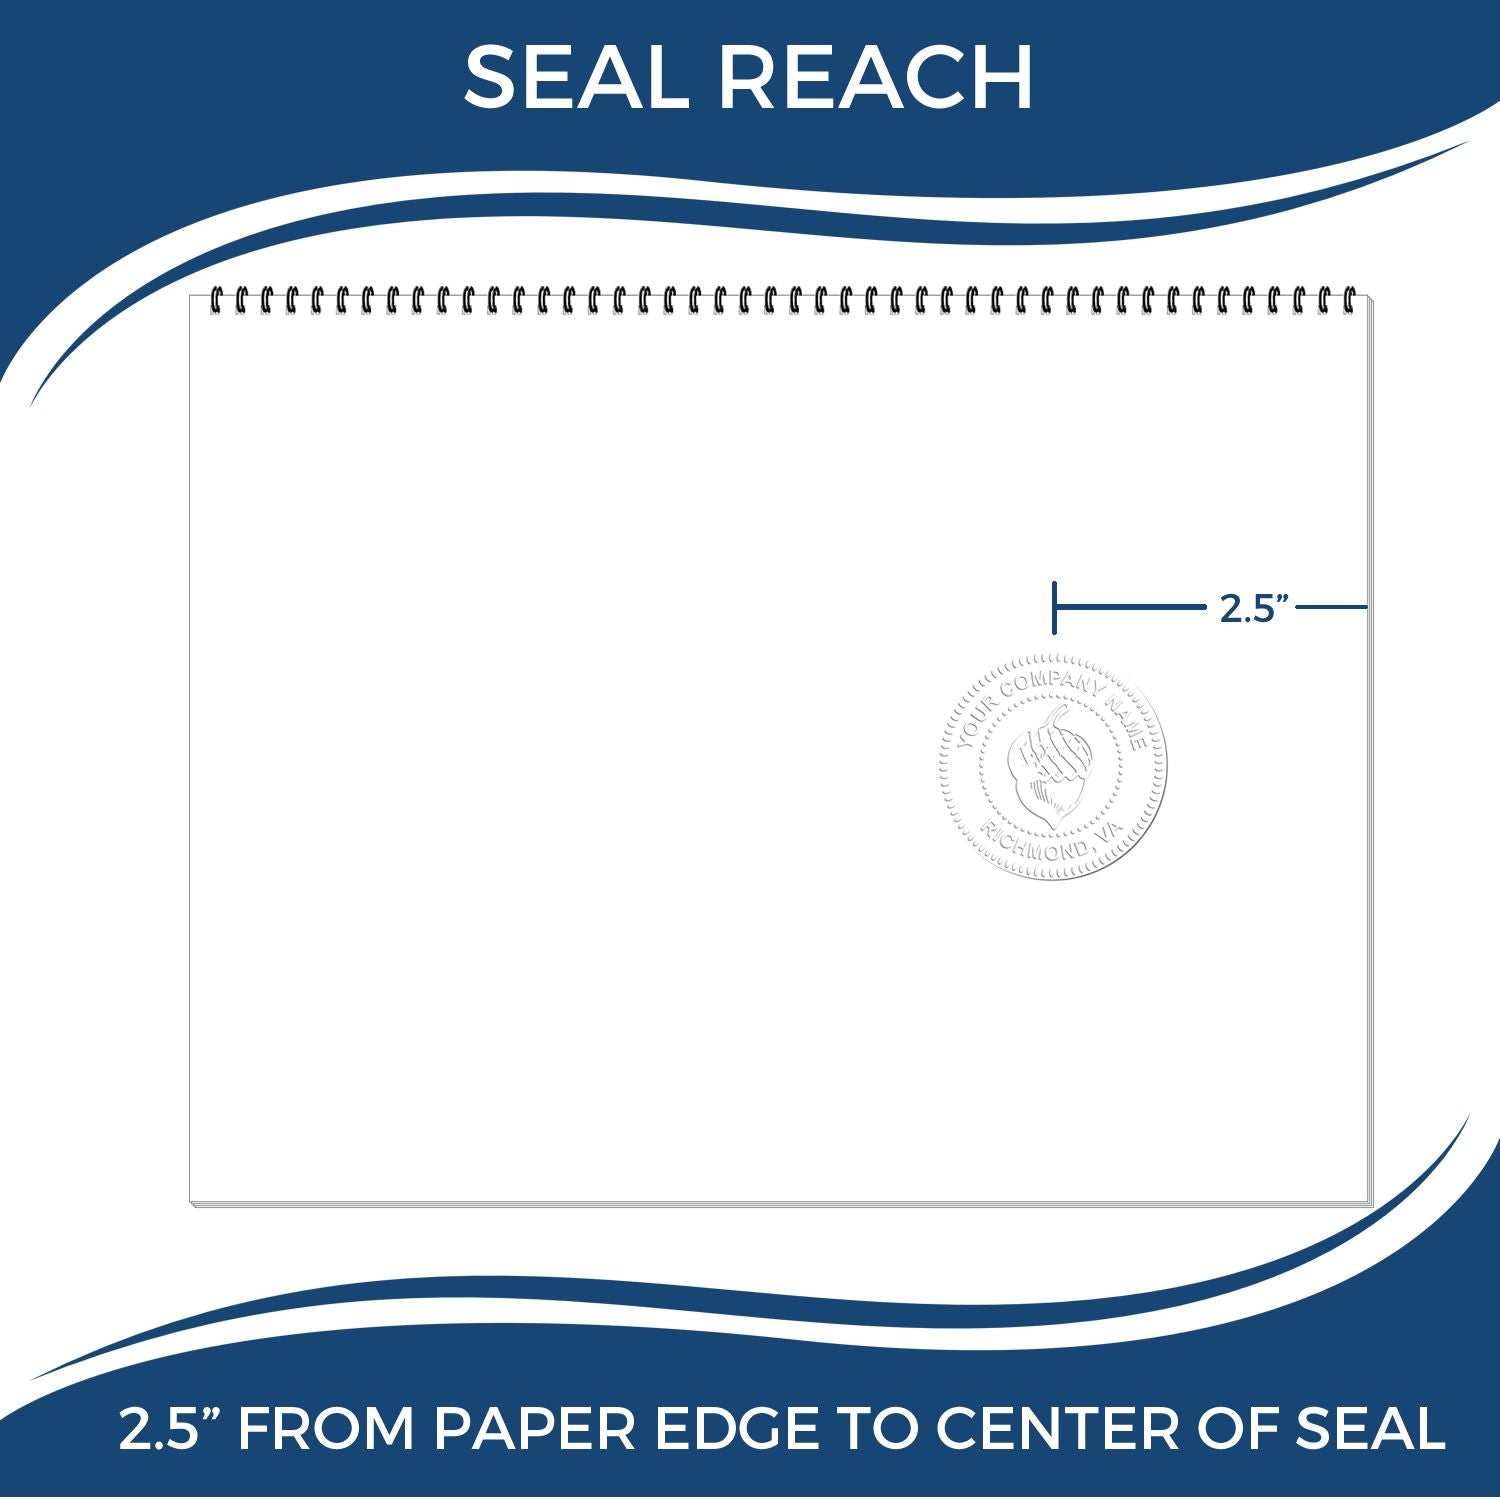 An infographic showing the seal reach which is represented by a ruler and a miniature seal image of the Heavy Duty Cast Iron Louisiana Architect Embosser